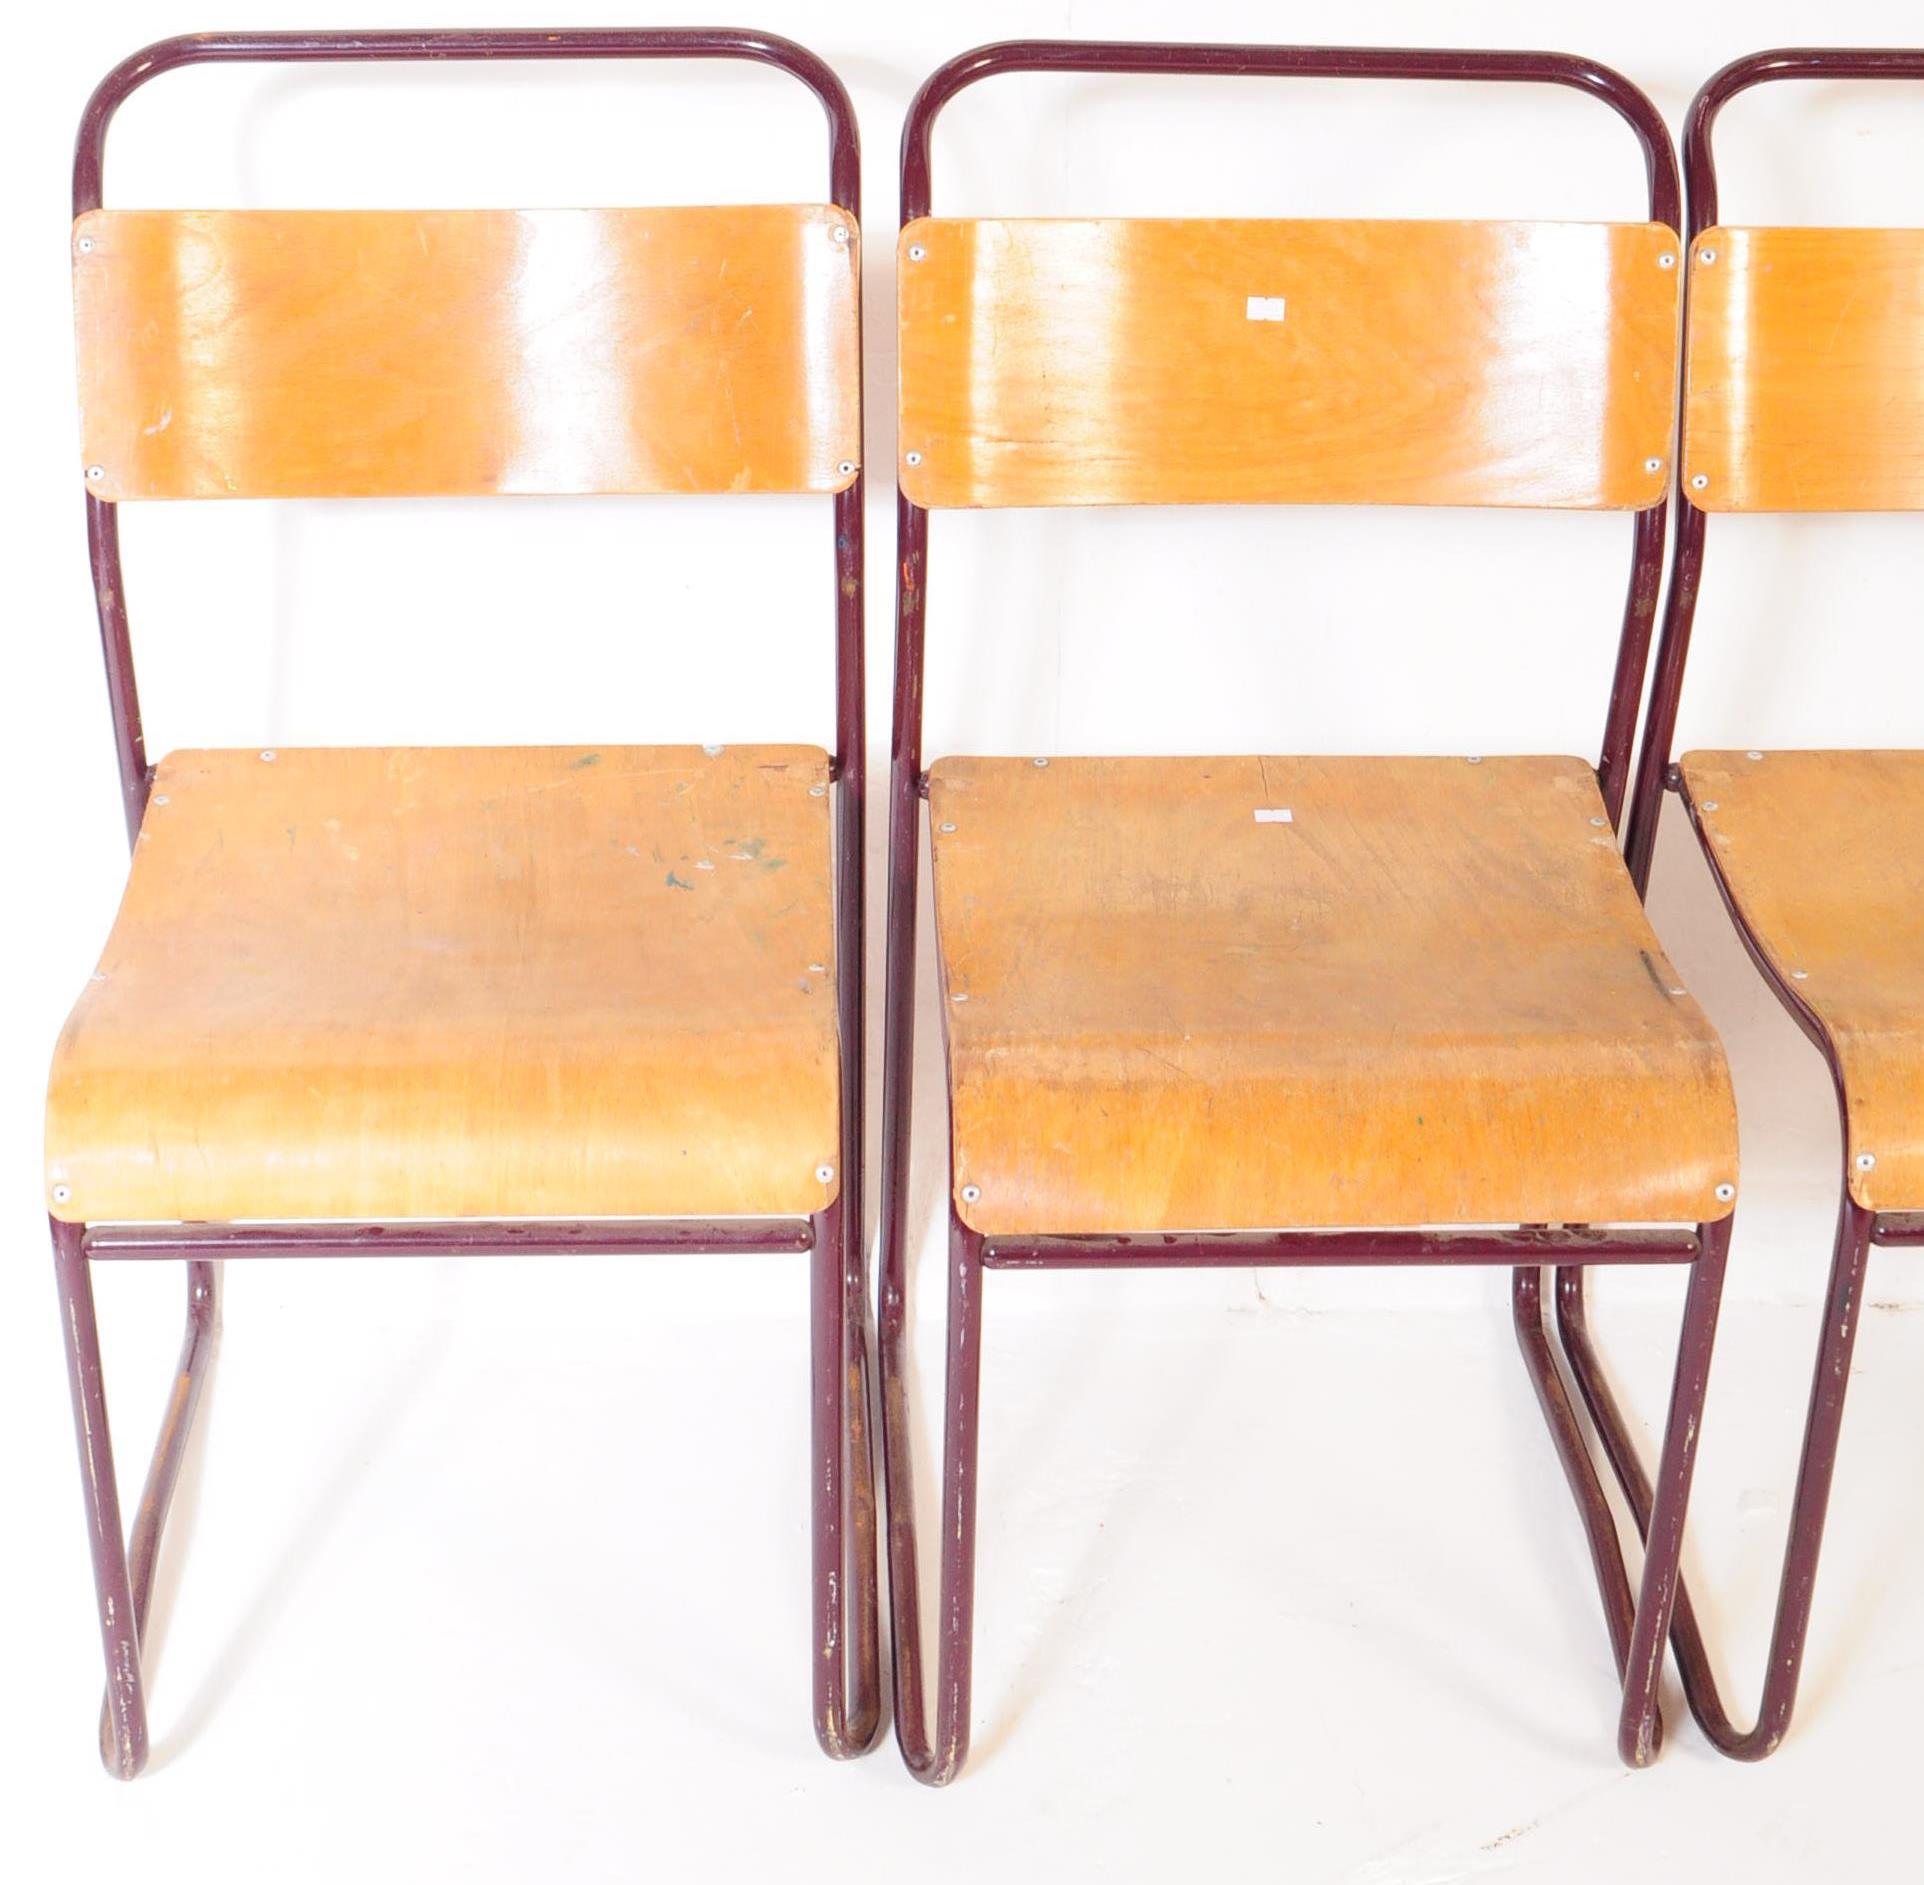 SET OF FOUR VINTAGE 20TH CENTURY SCHOOL STACKING CHAIRS - Image 2 of 6